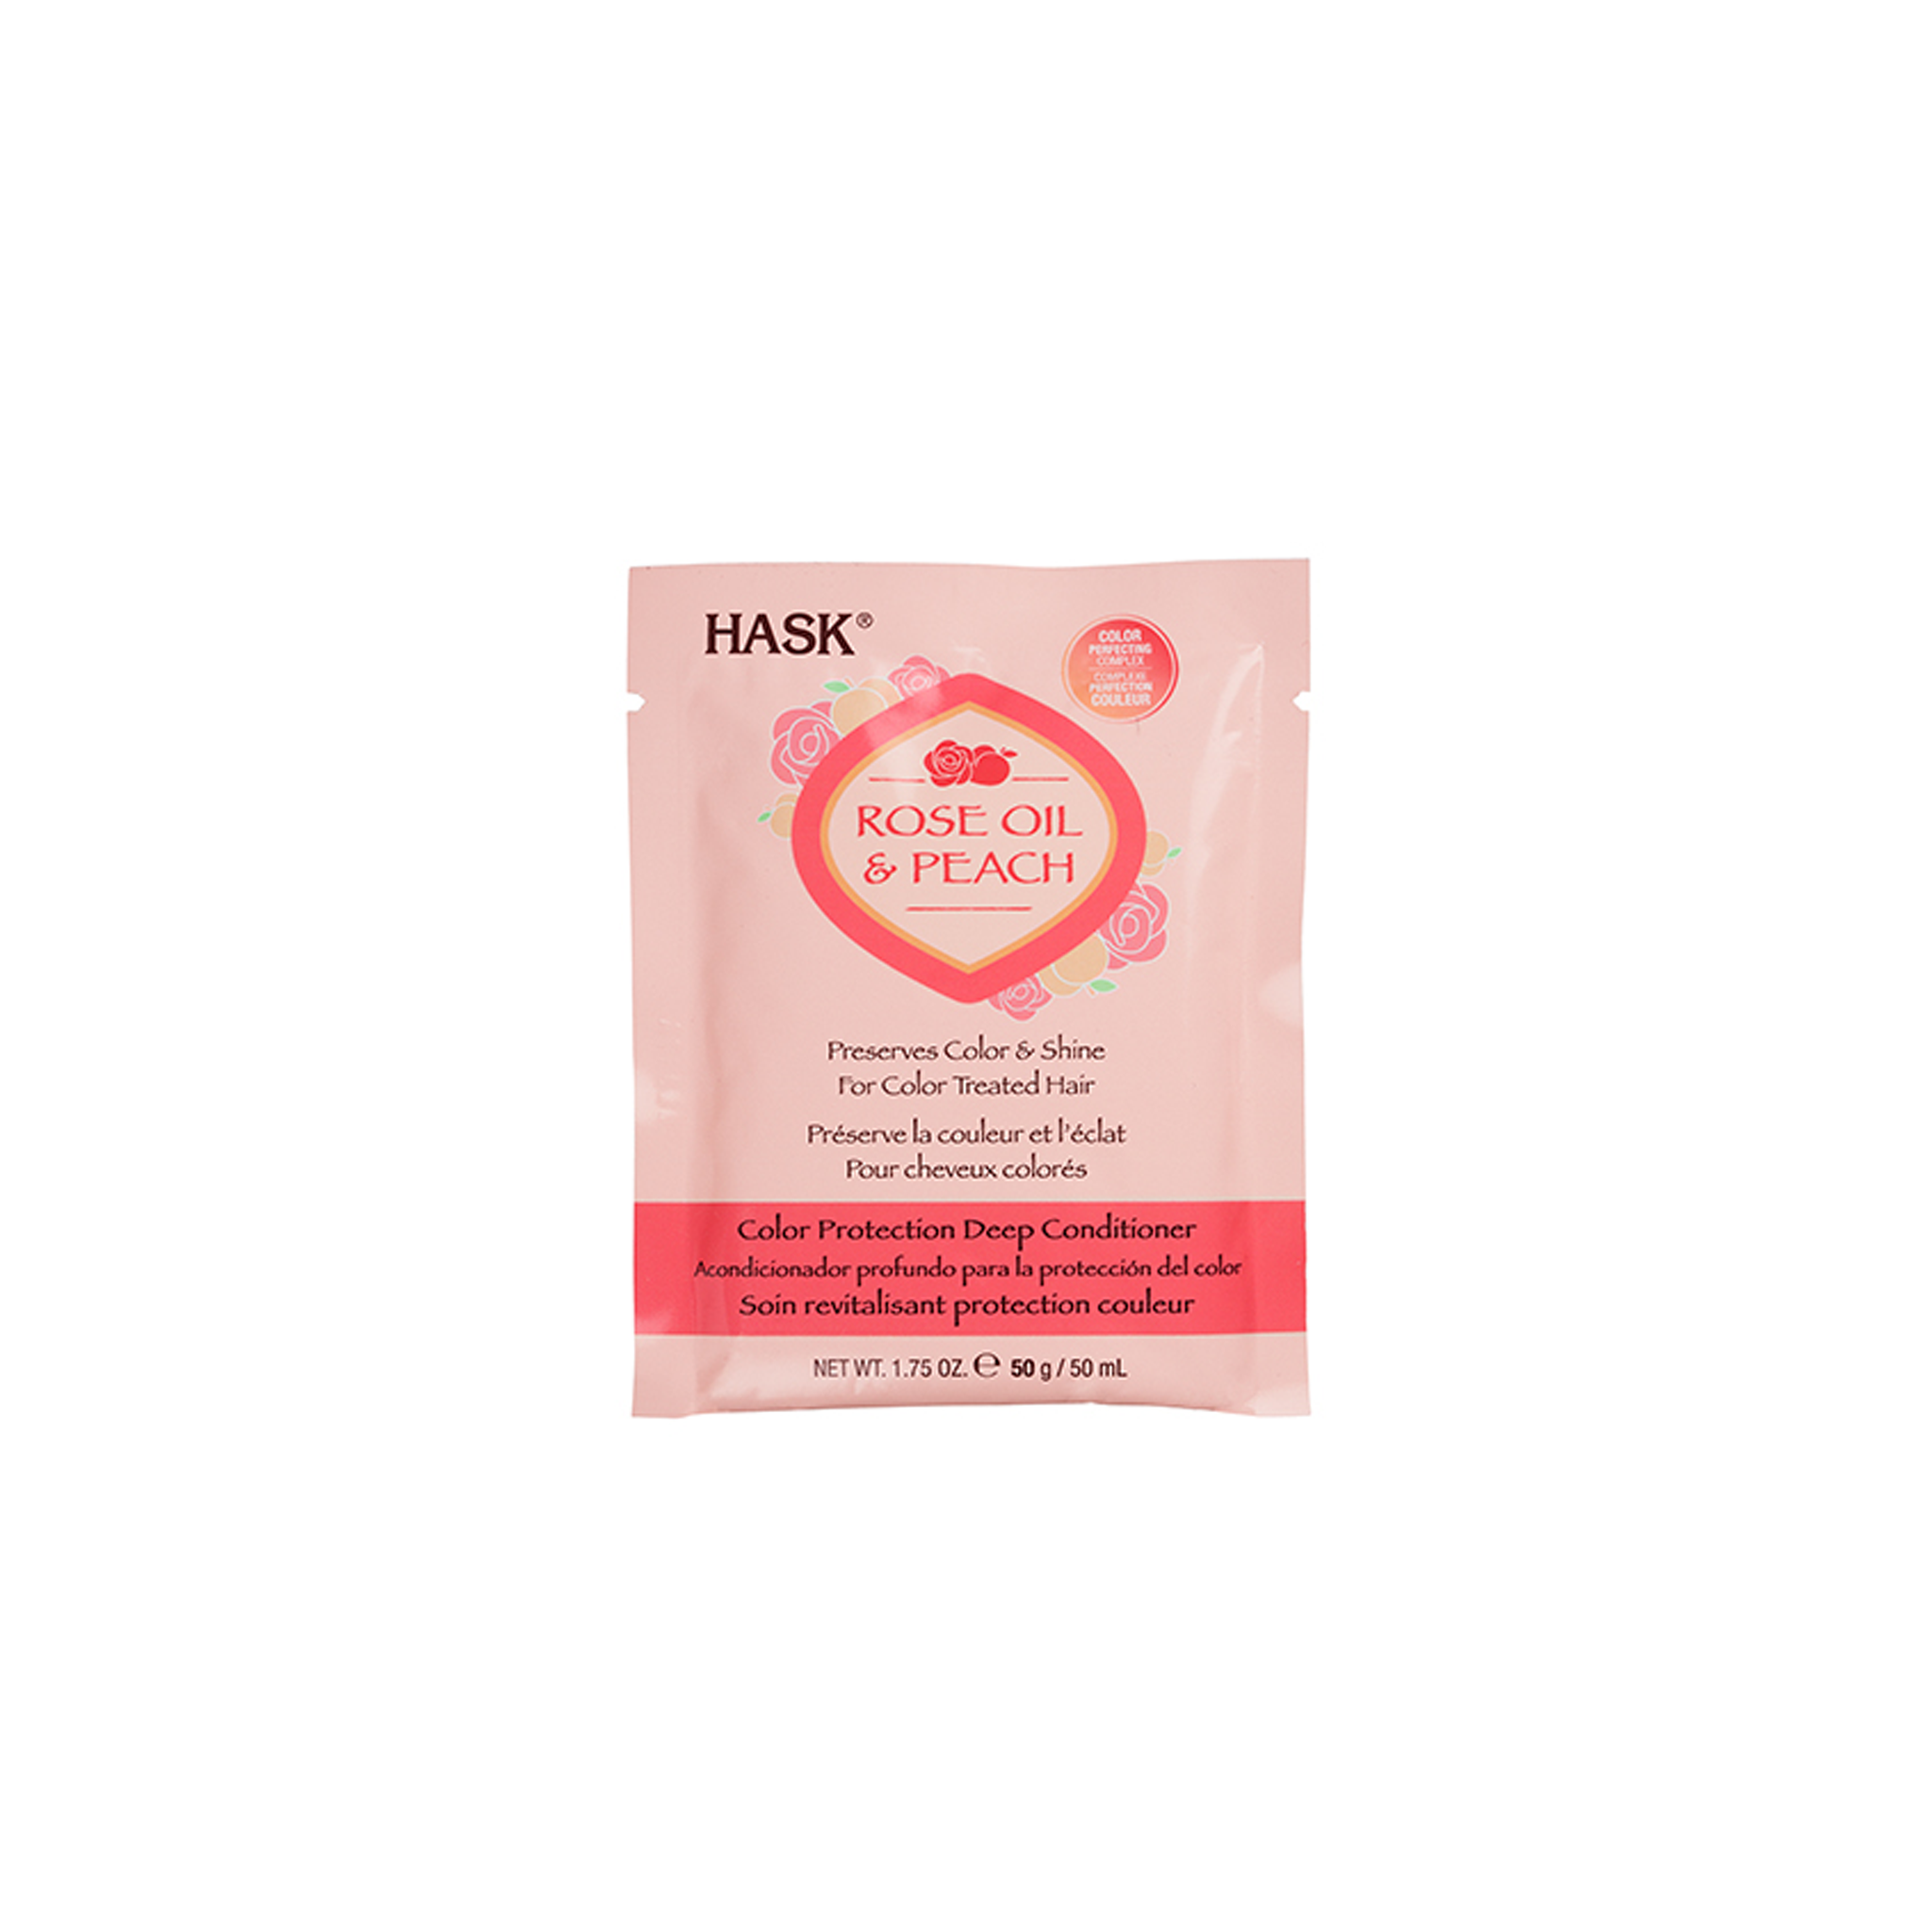 Hask Rose Oil & Peach Colour Protection Deep Conditioner